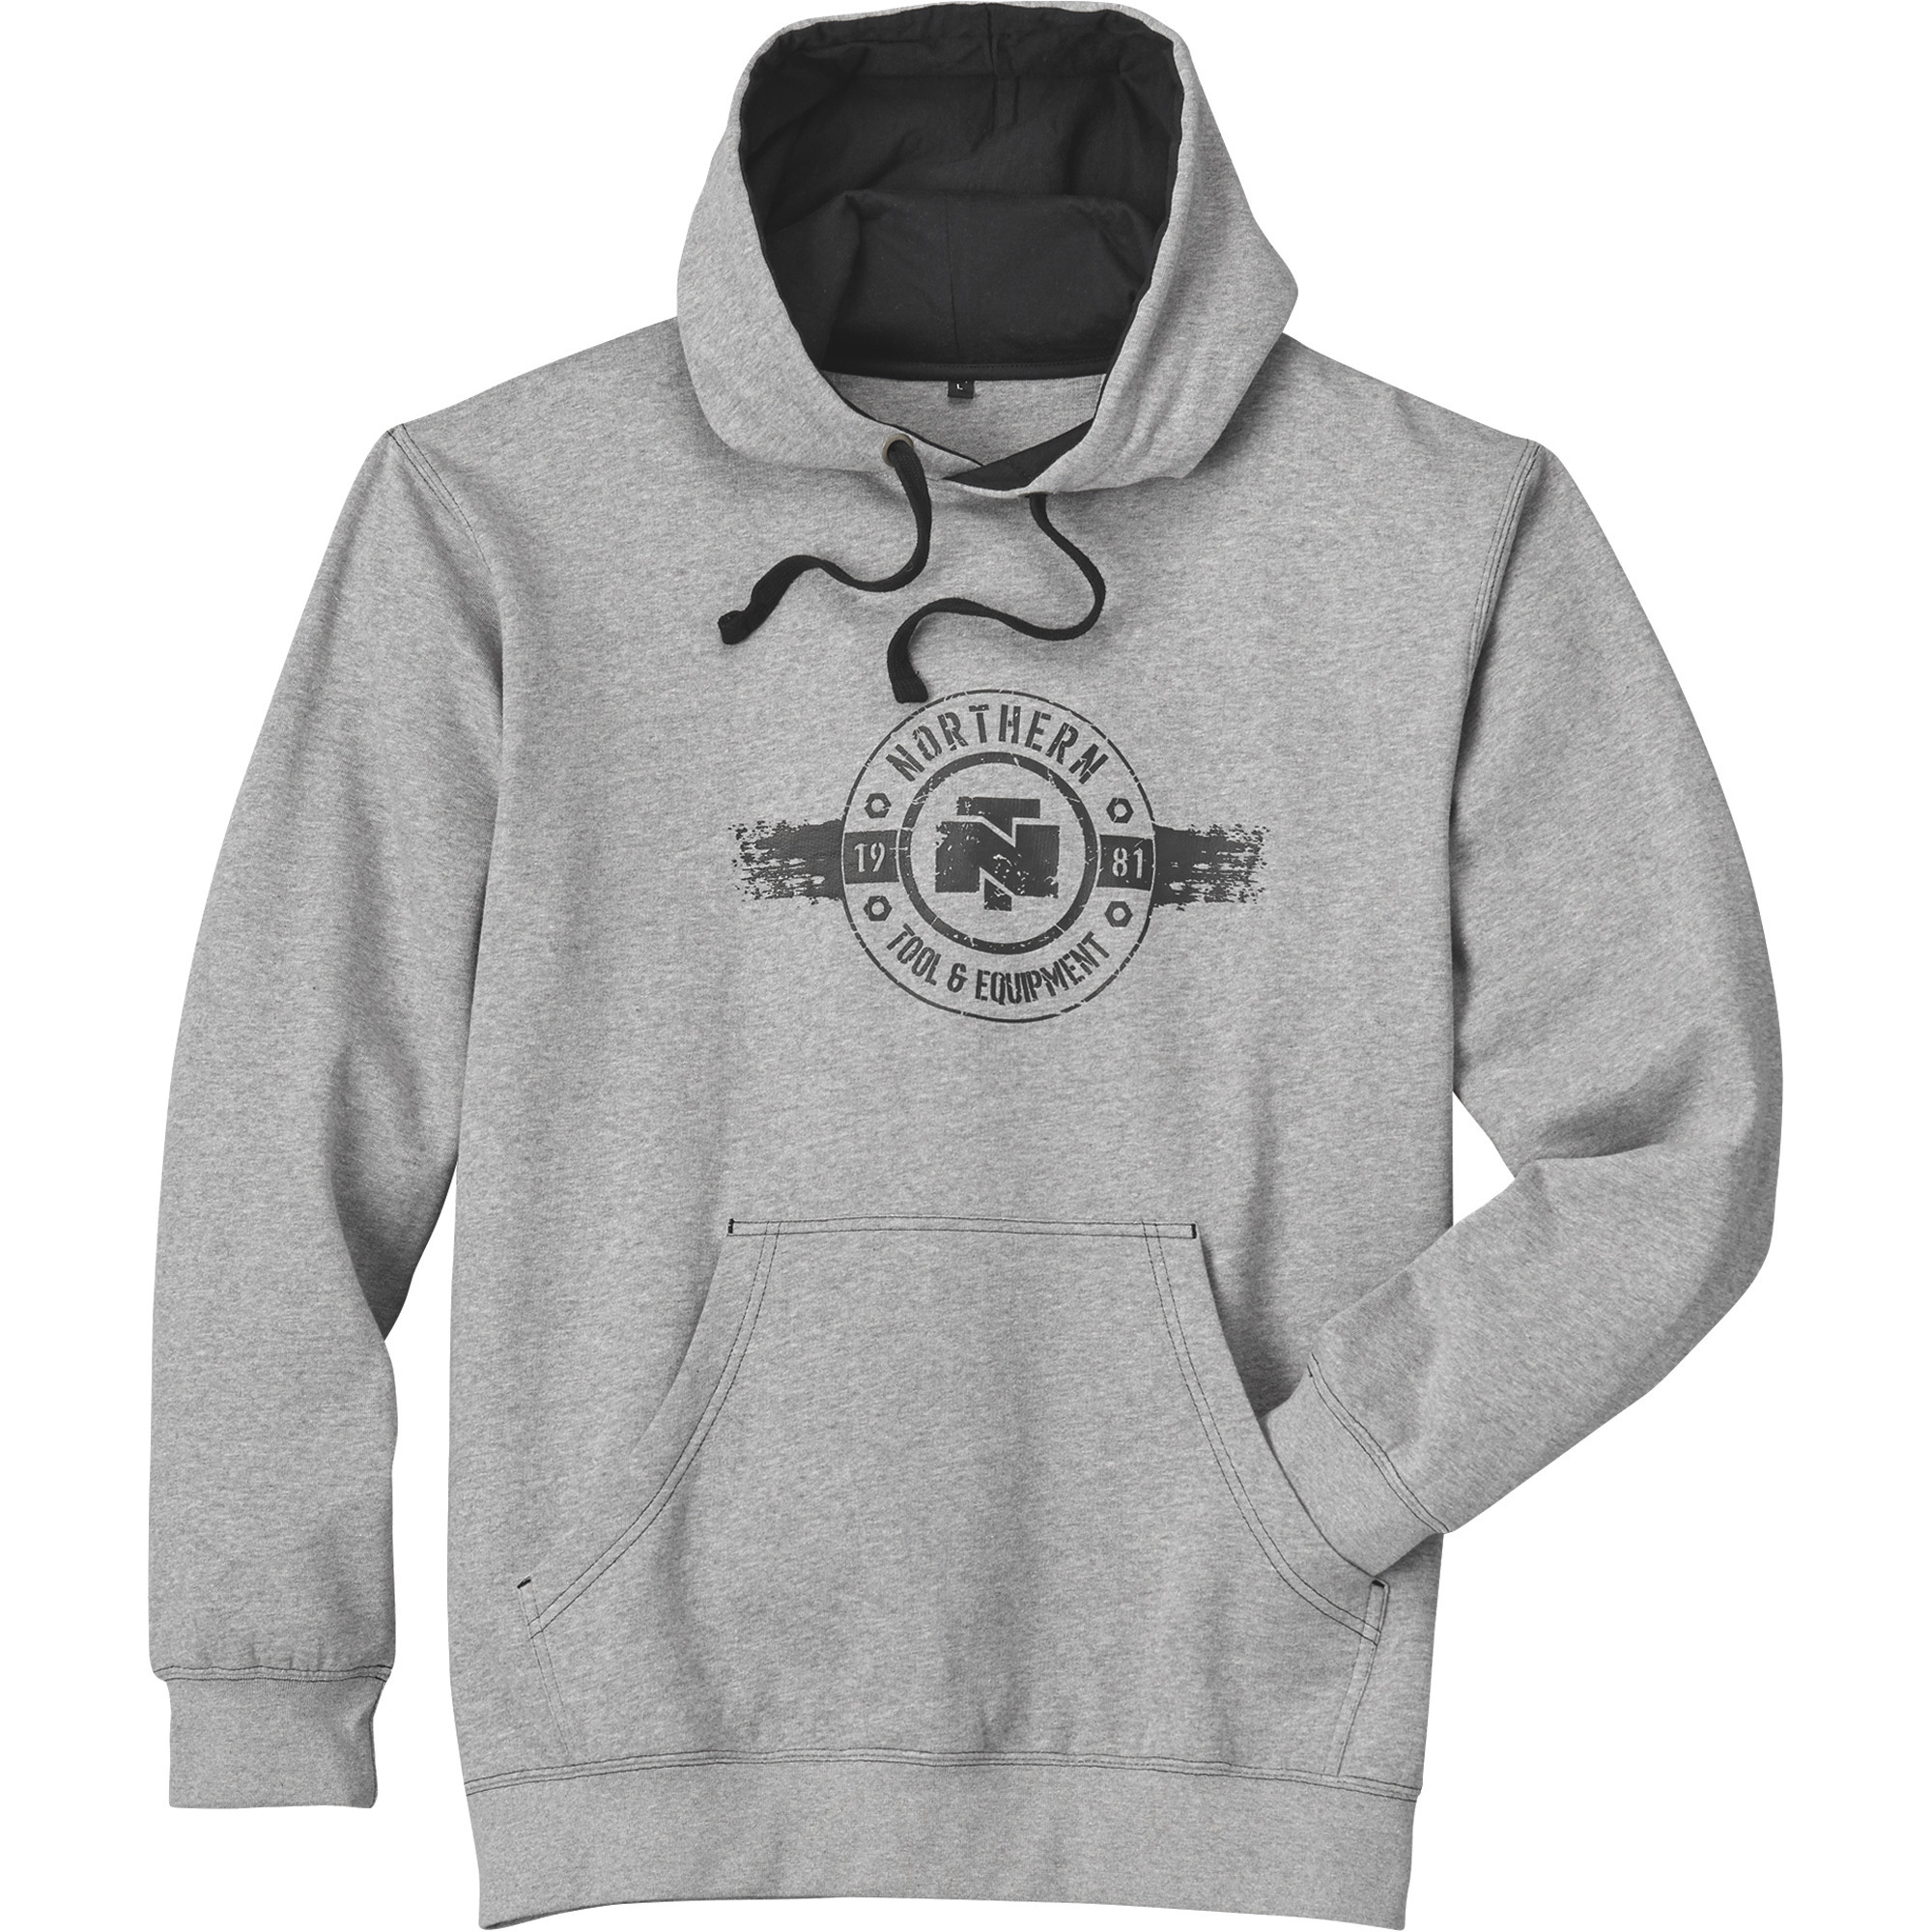 Gravel Gear Men's Pullover Hoodie with NTE Graphics â Gray, 2XL